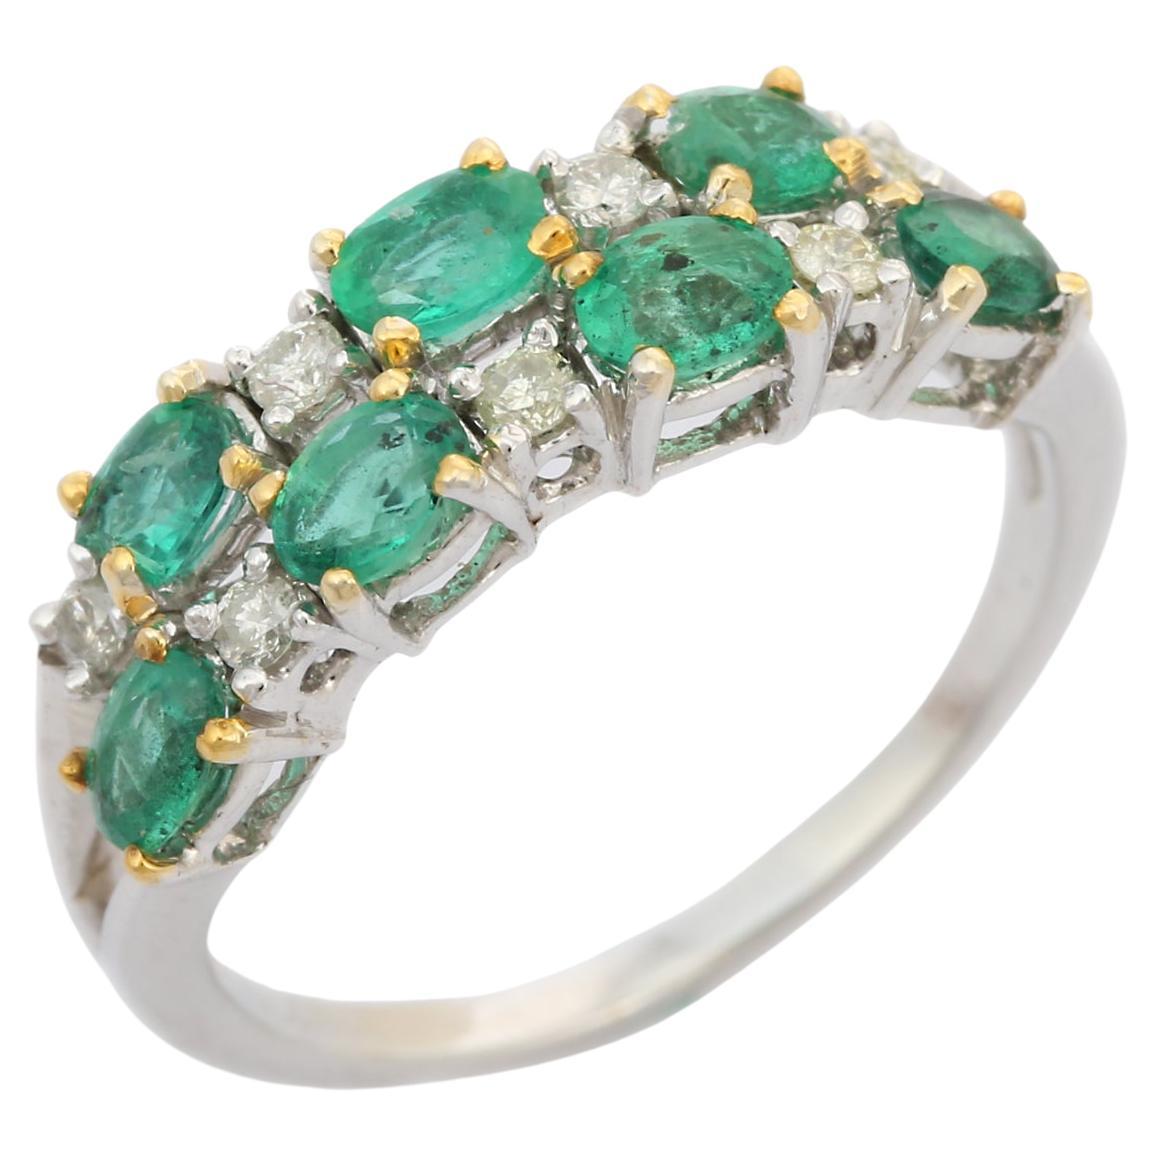 For Sale:  Brilliant Diamond and Emerald Wedding Band Ring Studded in 18k White Gold